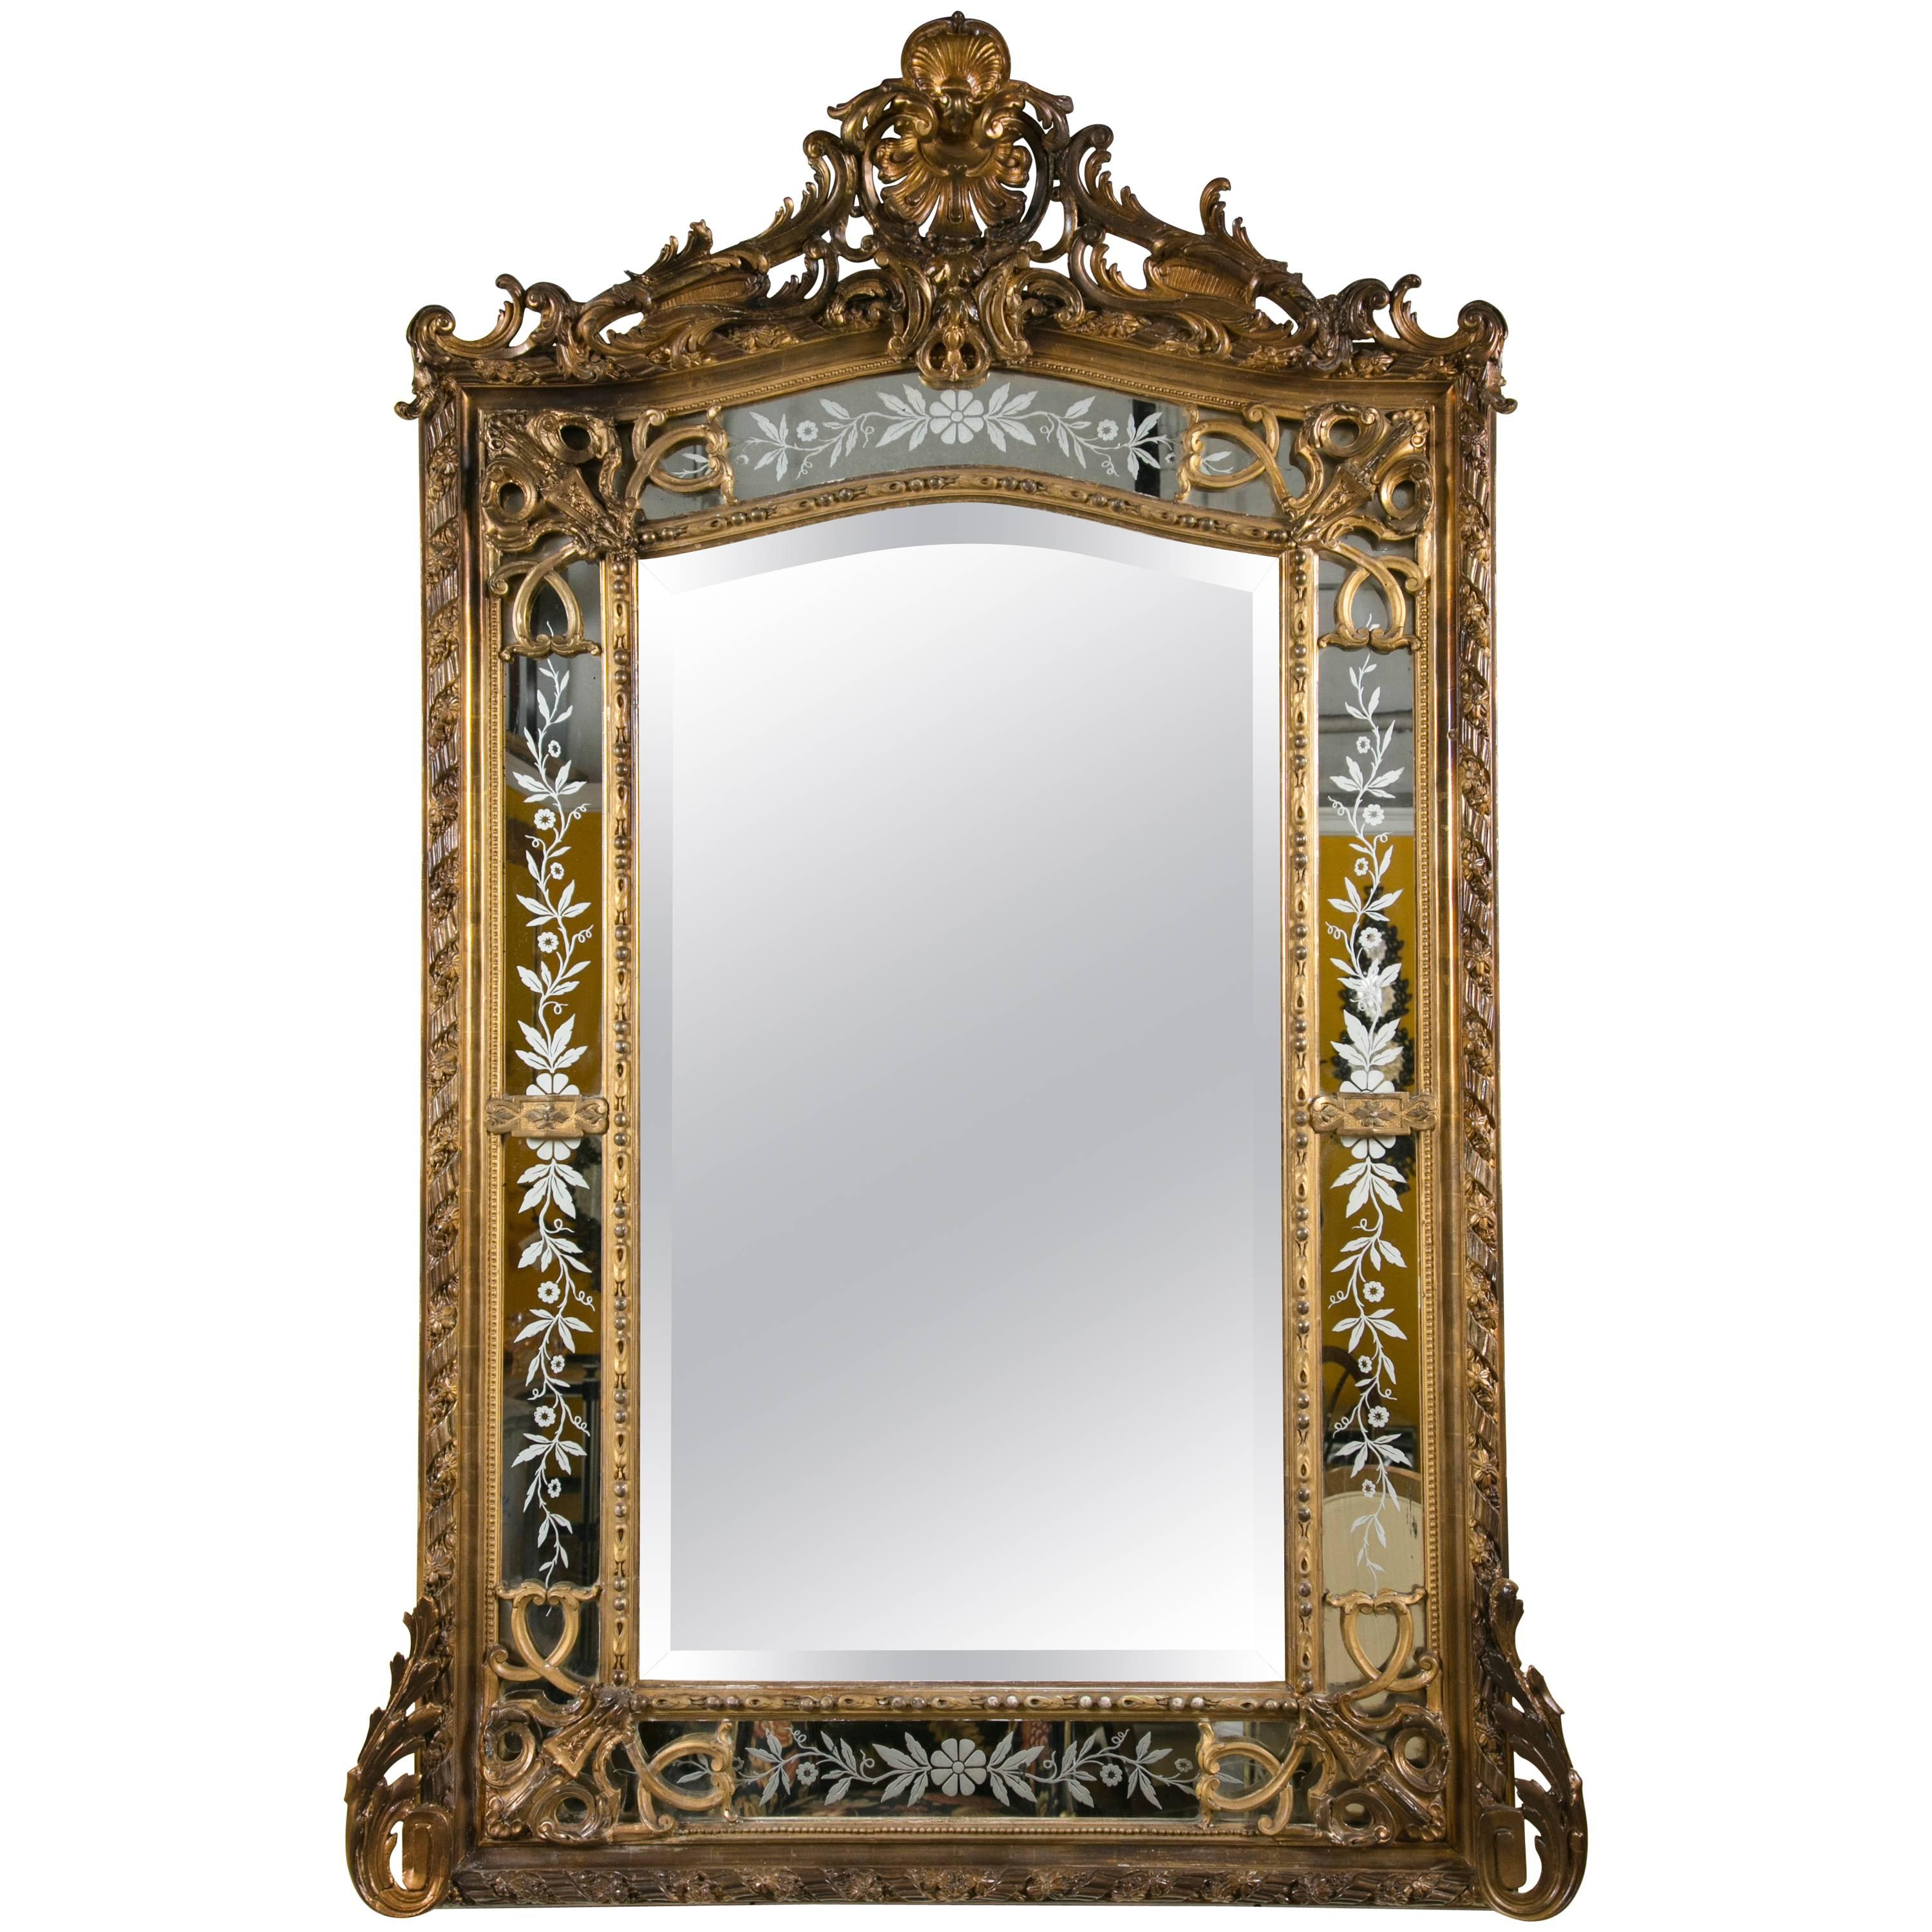 French Designer, Beaux Arts, Large Wall Mirror, Gilded Carved Wood, Gesso, 1890s